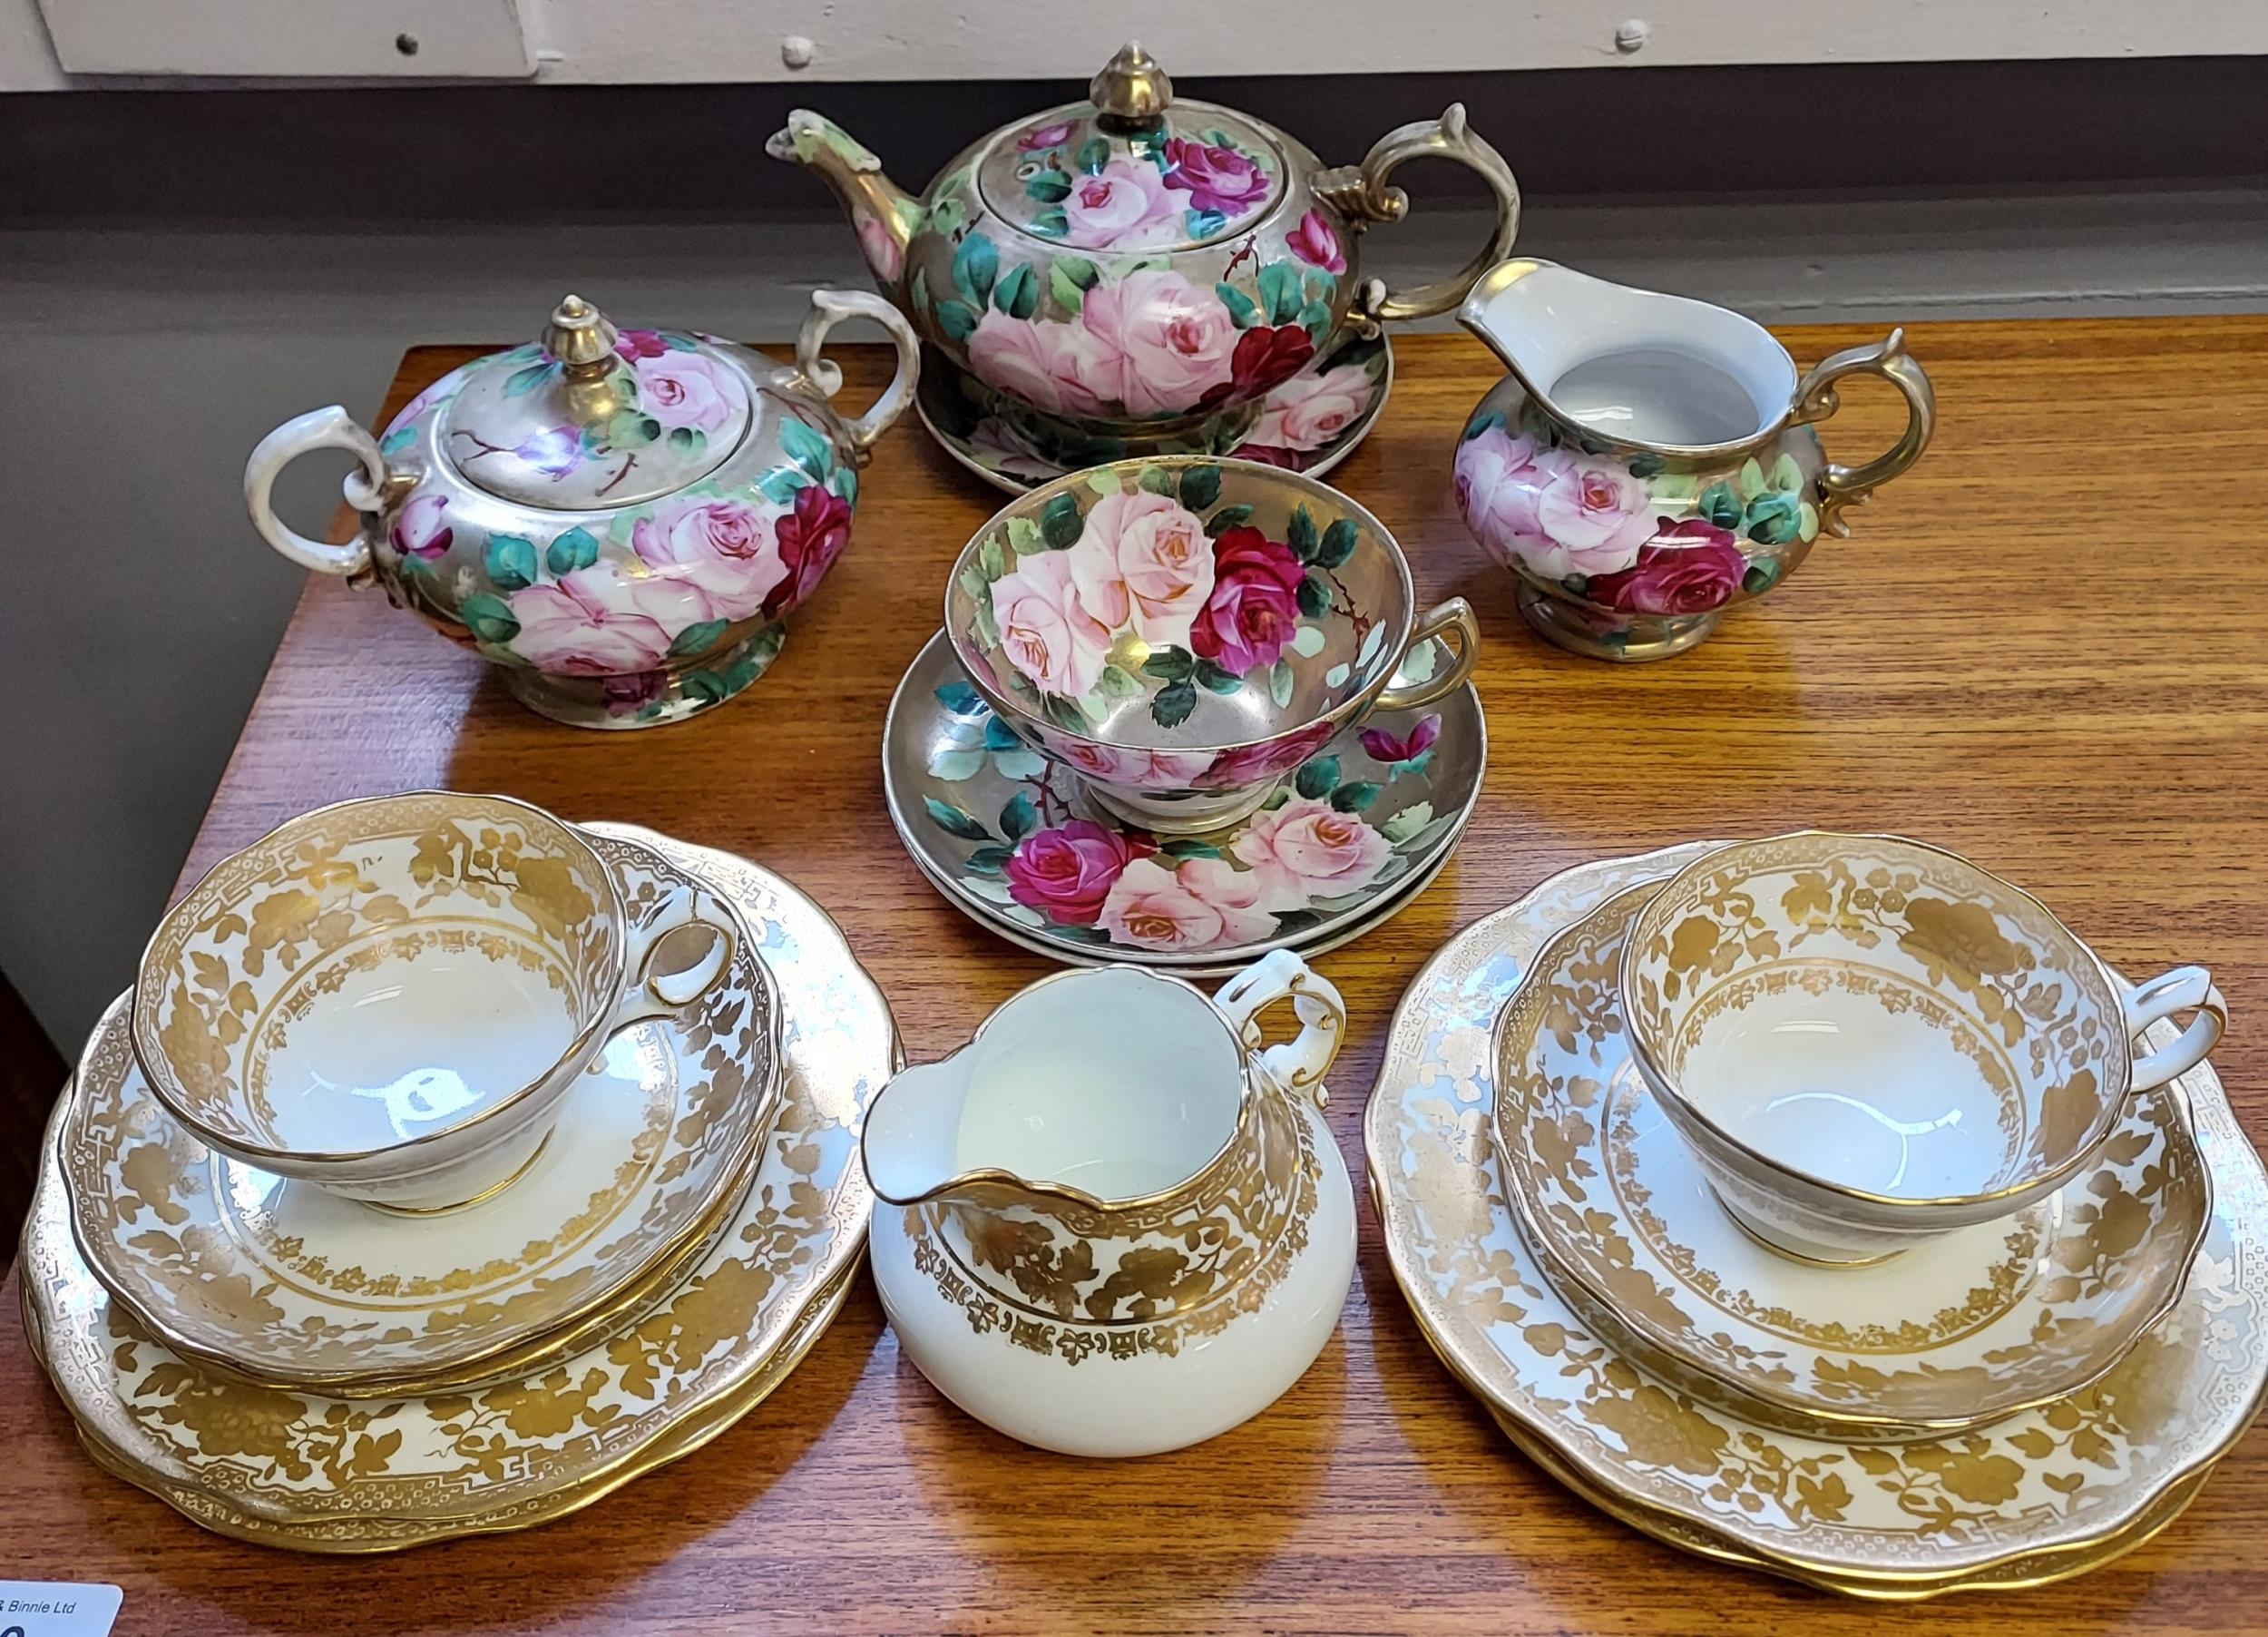 A 10 Piece Hammersley & co part tea set together with a hand painted Victorian rose design tea